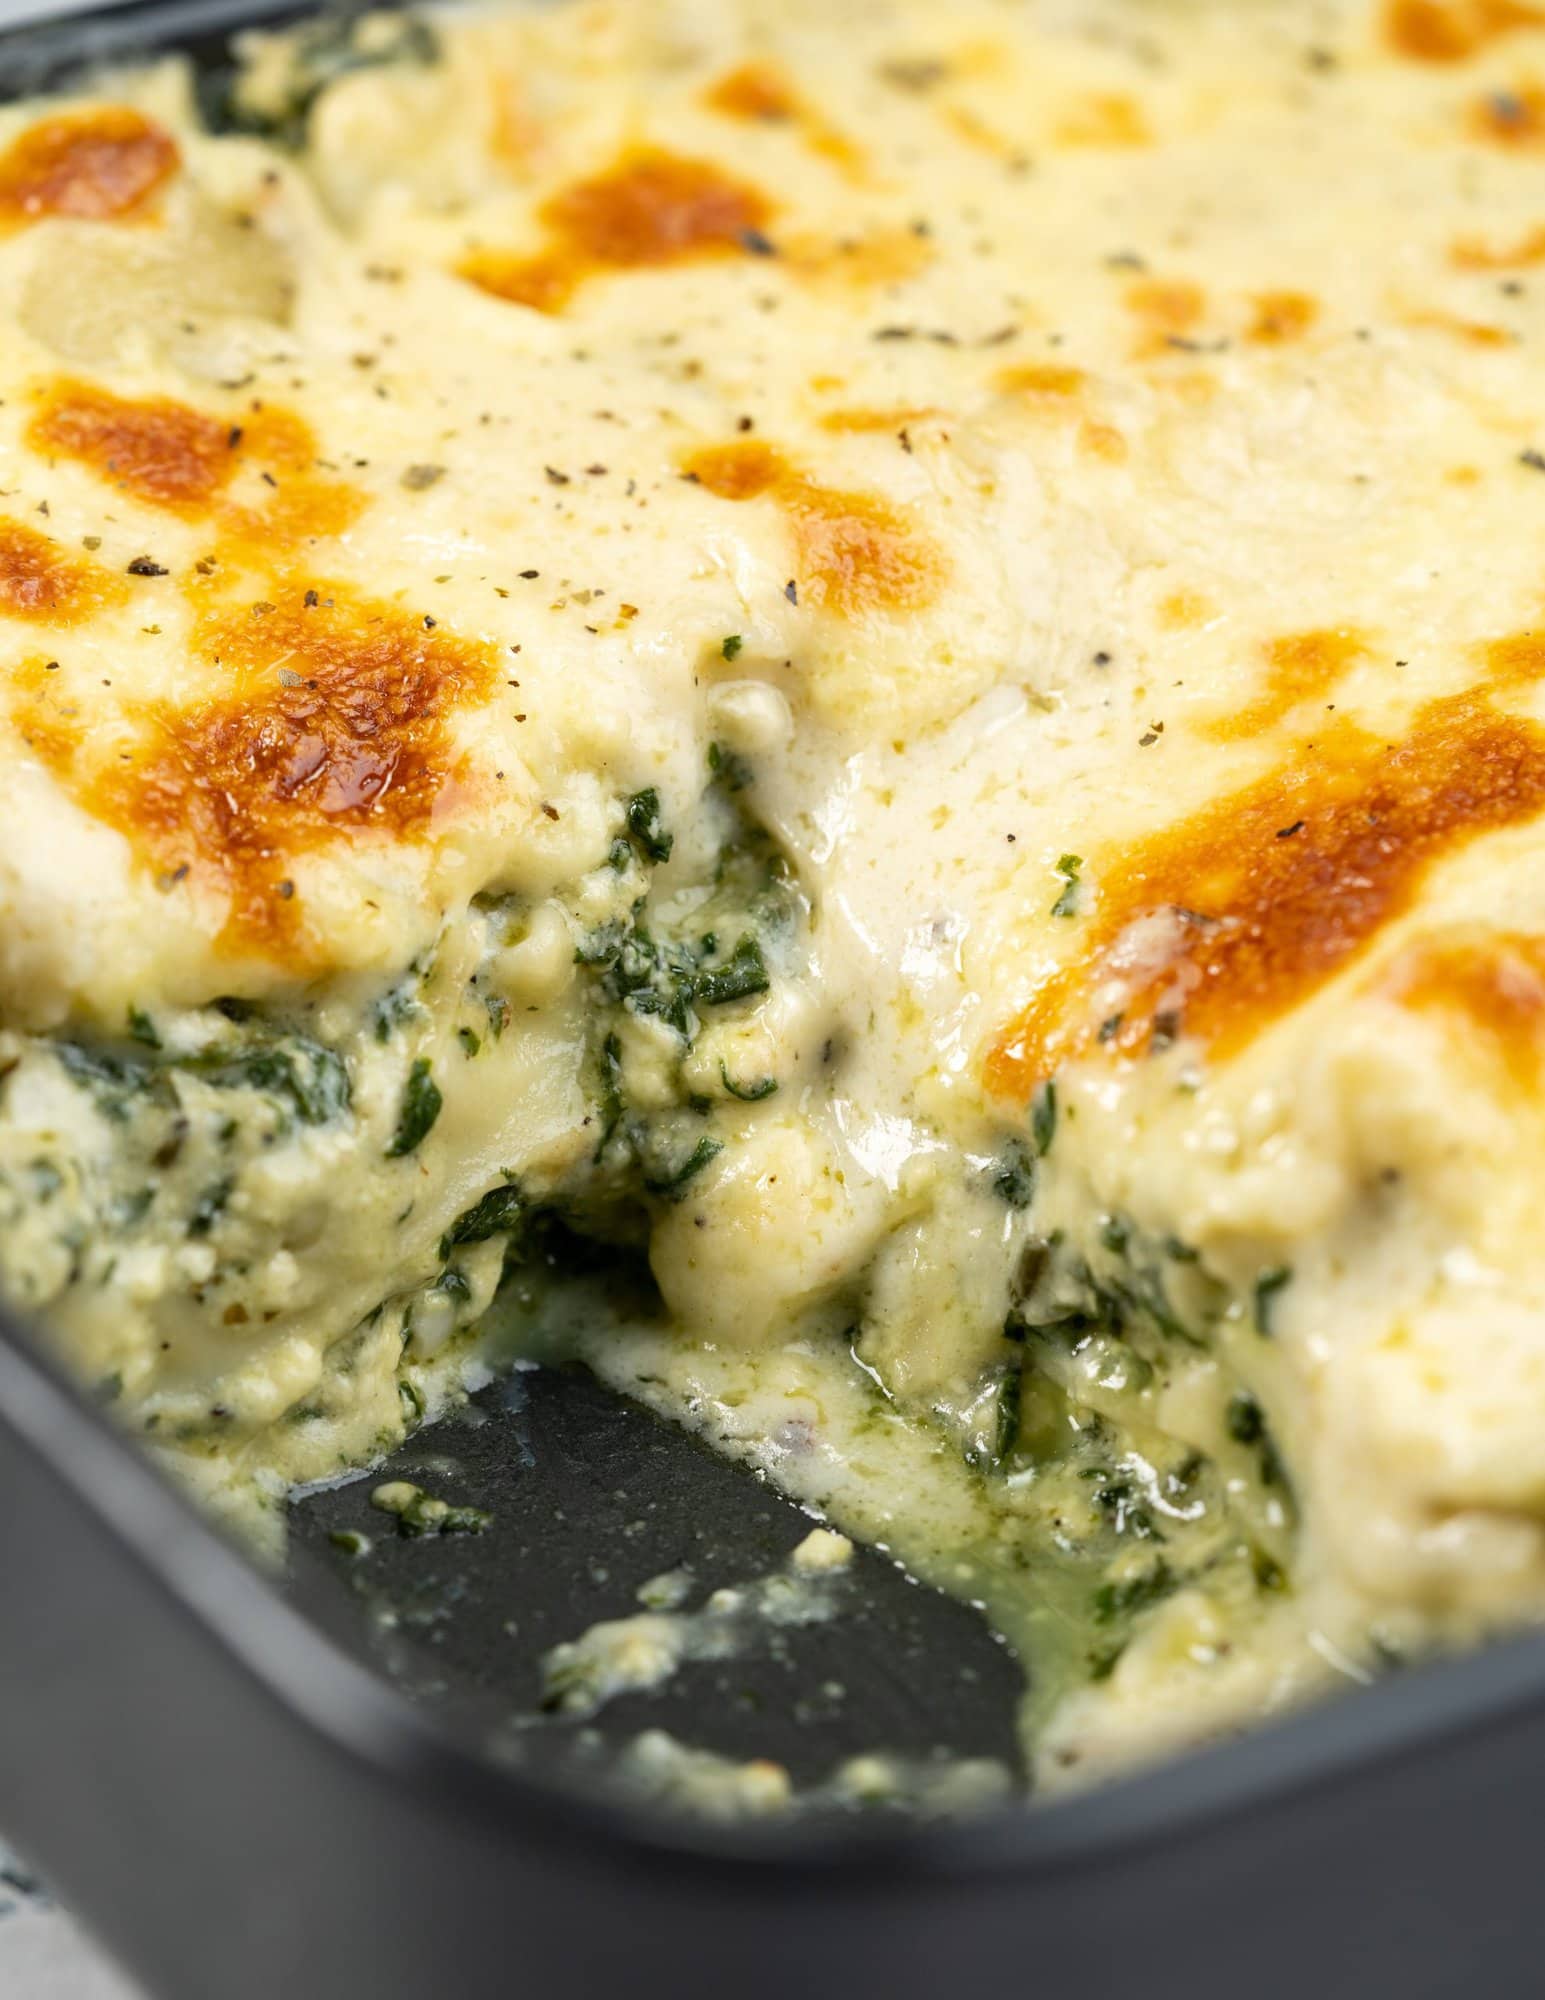 Cheese oozing out of creamy spinach lasagna layers when a slice is cut out. The top has a baked golden brown color.